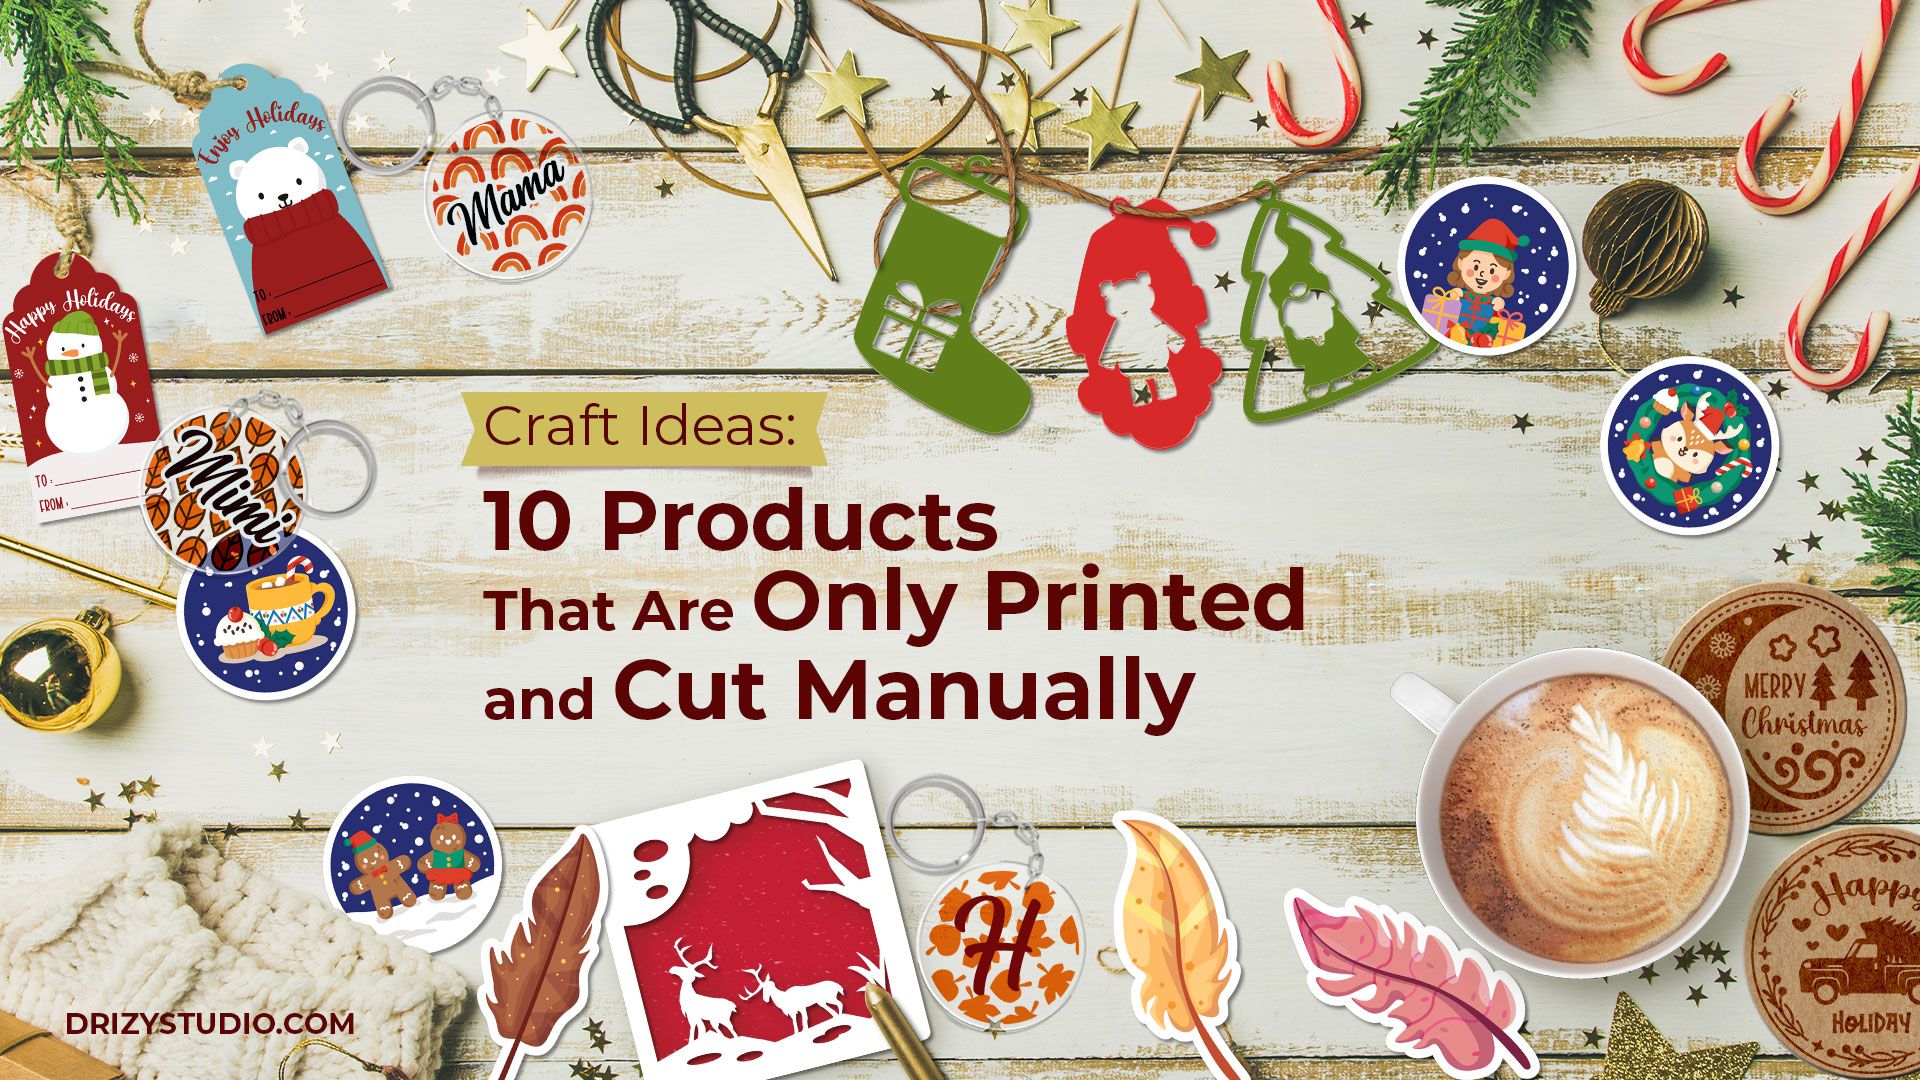 Craft Ideas 10 Products That Are Only Printed and Cut Manually cover